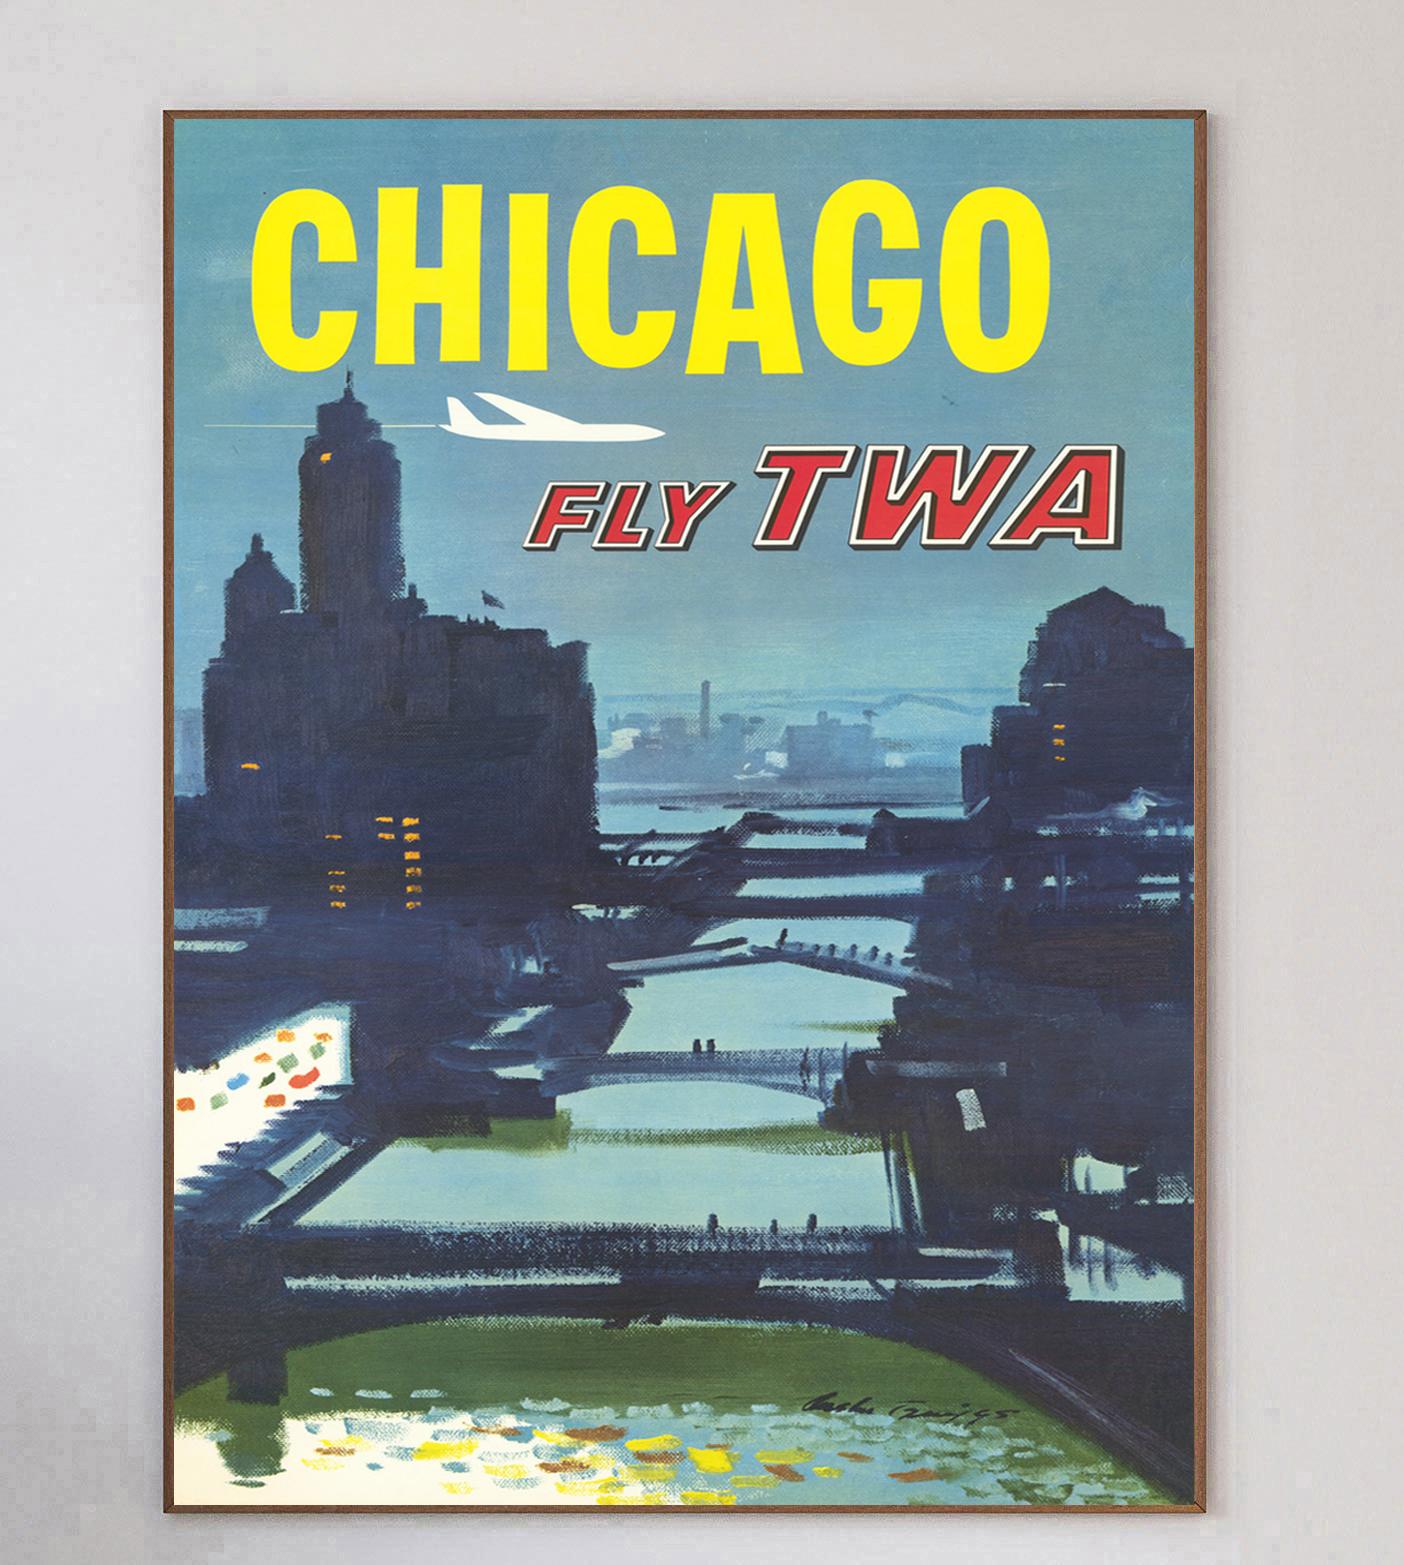 This poster was created in 1955 for Howard Hughes’ Trans World Airlines promoting their routes to Chicago. Illustrated by American artist Austin Briggs, this design features a wonderful view of the bridges along the Chicago River at dawn. 

This